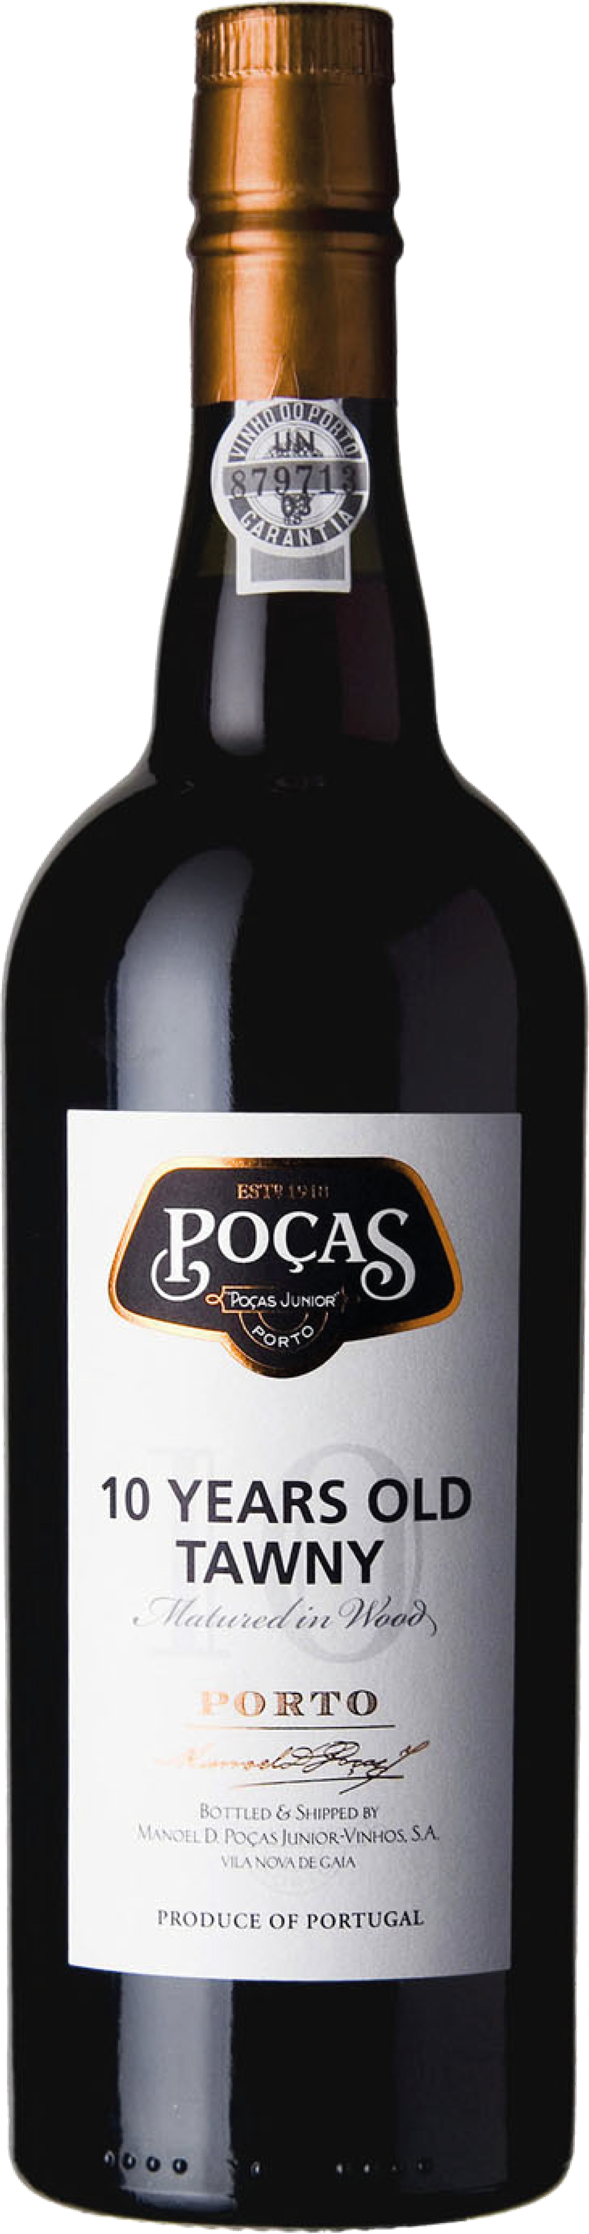 Pocas 10 years old Tawny